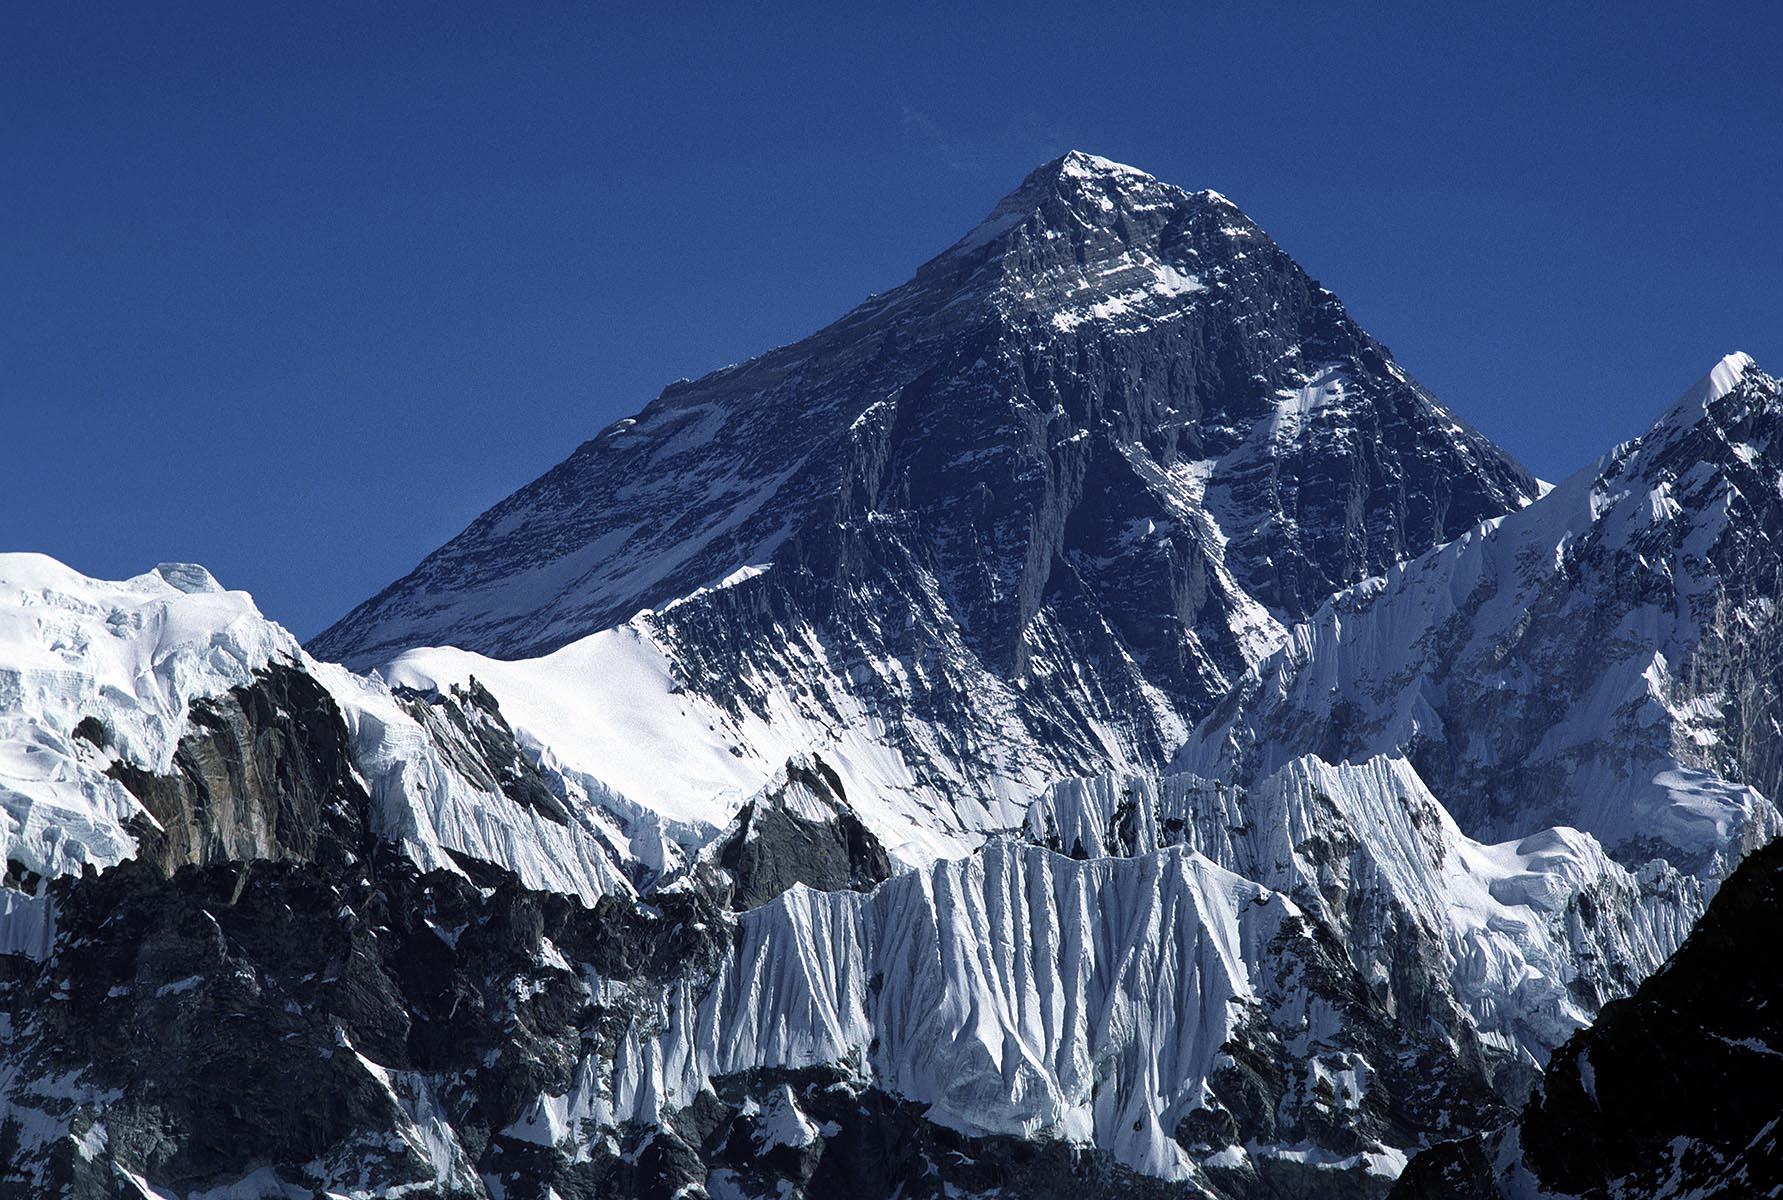 Mount Everest, the tallest mountain in the world, rises behind Nuptse to a staggering 29,028 feet - KHUMBU DISTRICT, NEPAL